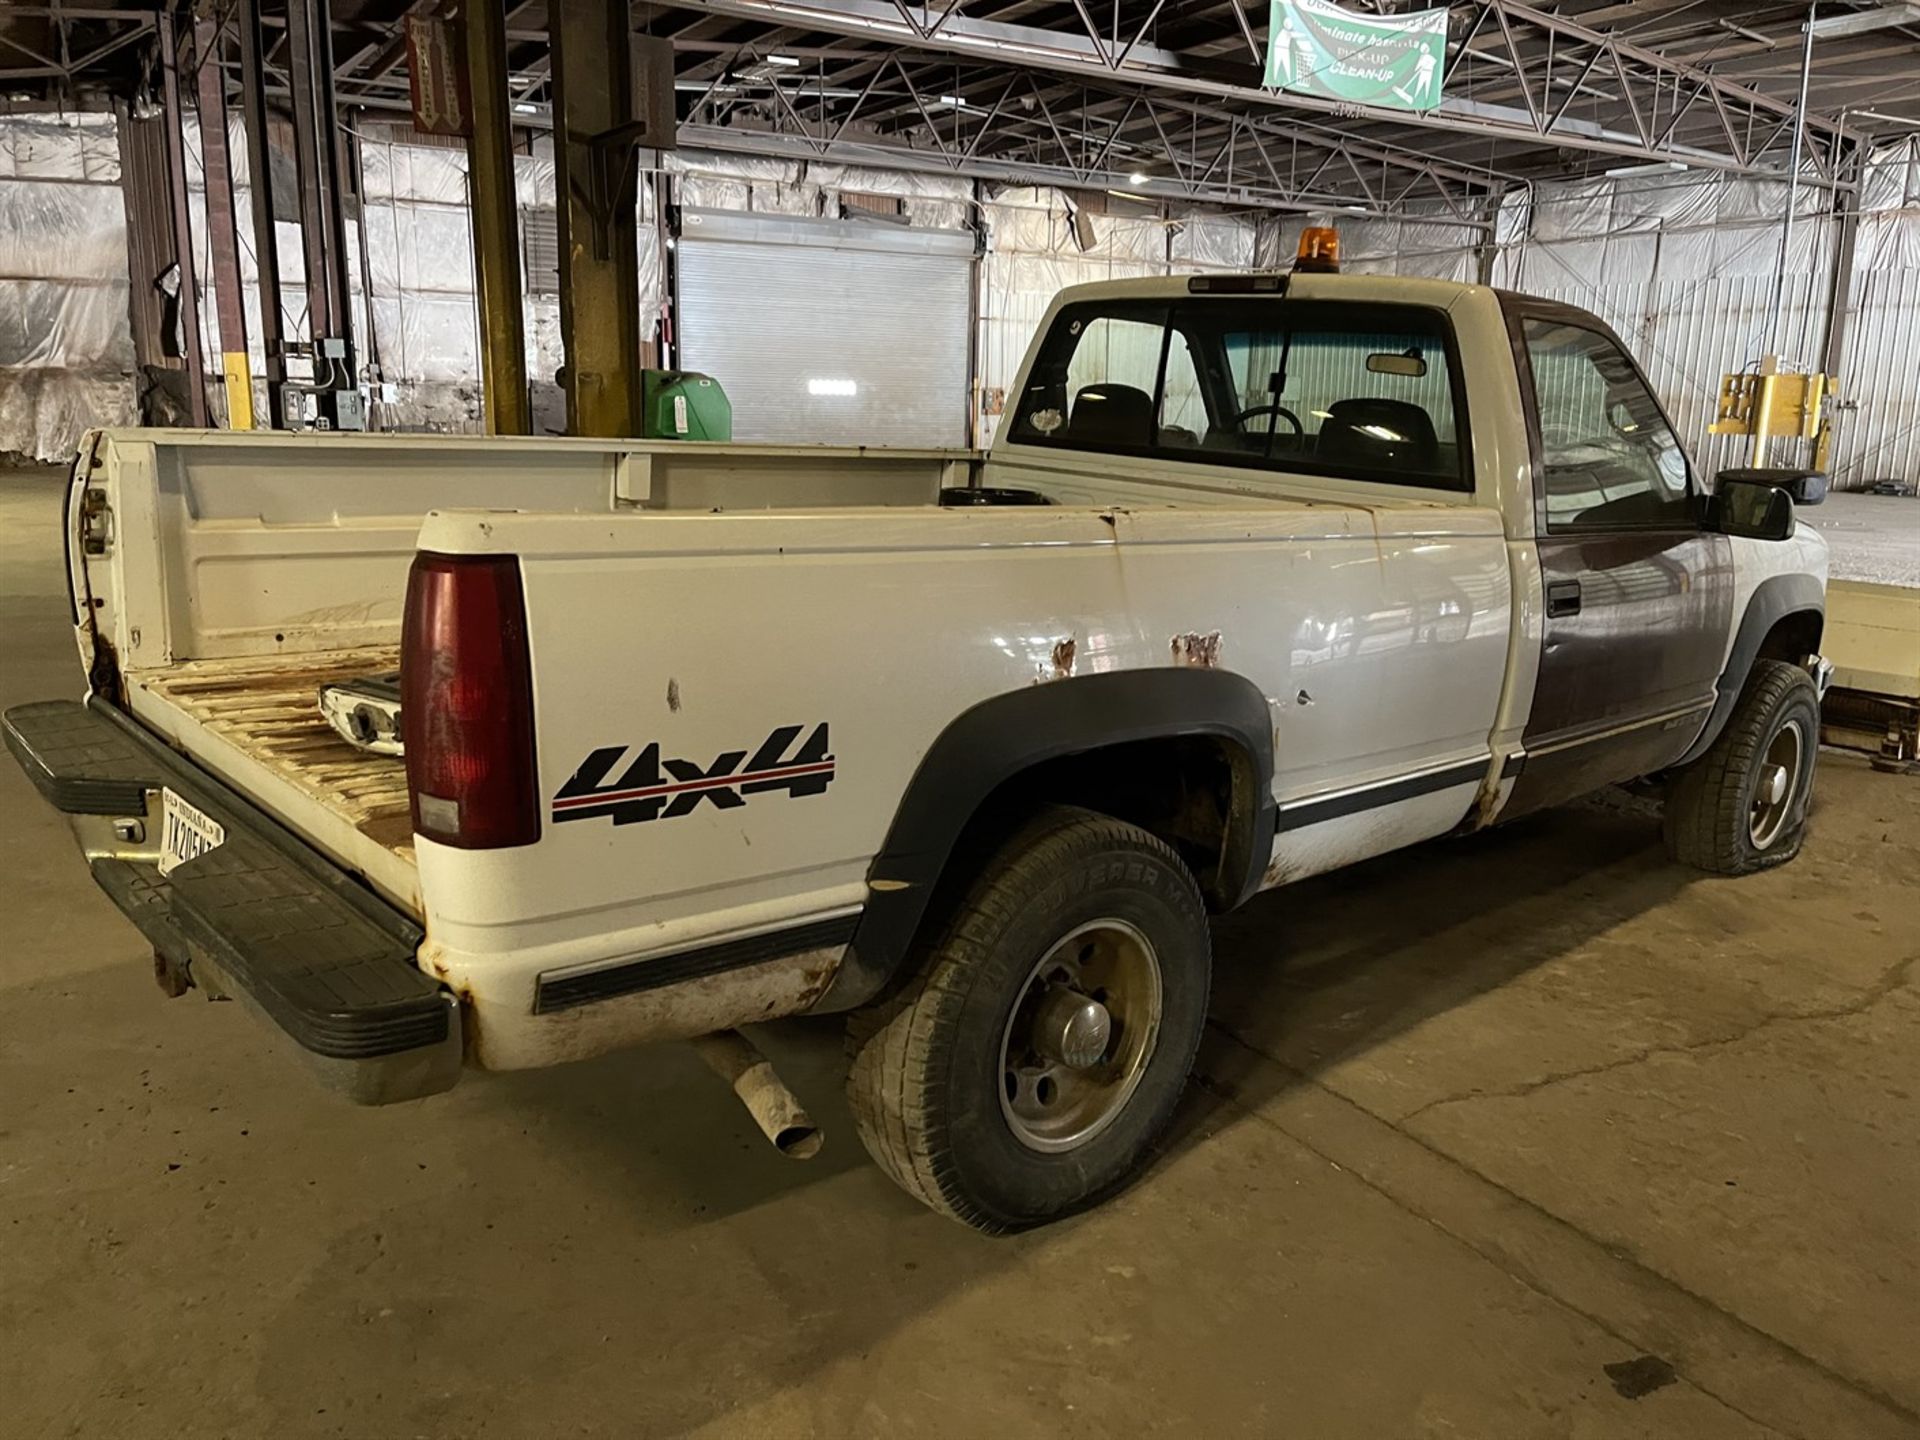 Chevy 2500 Pickup Truck, 4x4, Automatic, 183,638 Miles, Blizzard Plow, Needs Battery, Needs Fuel - Image 5 of 12